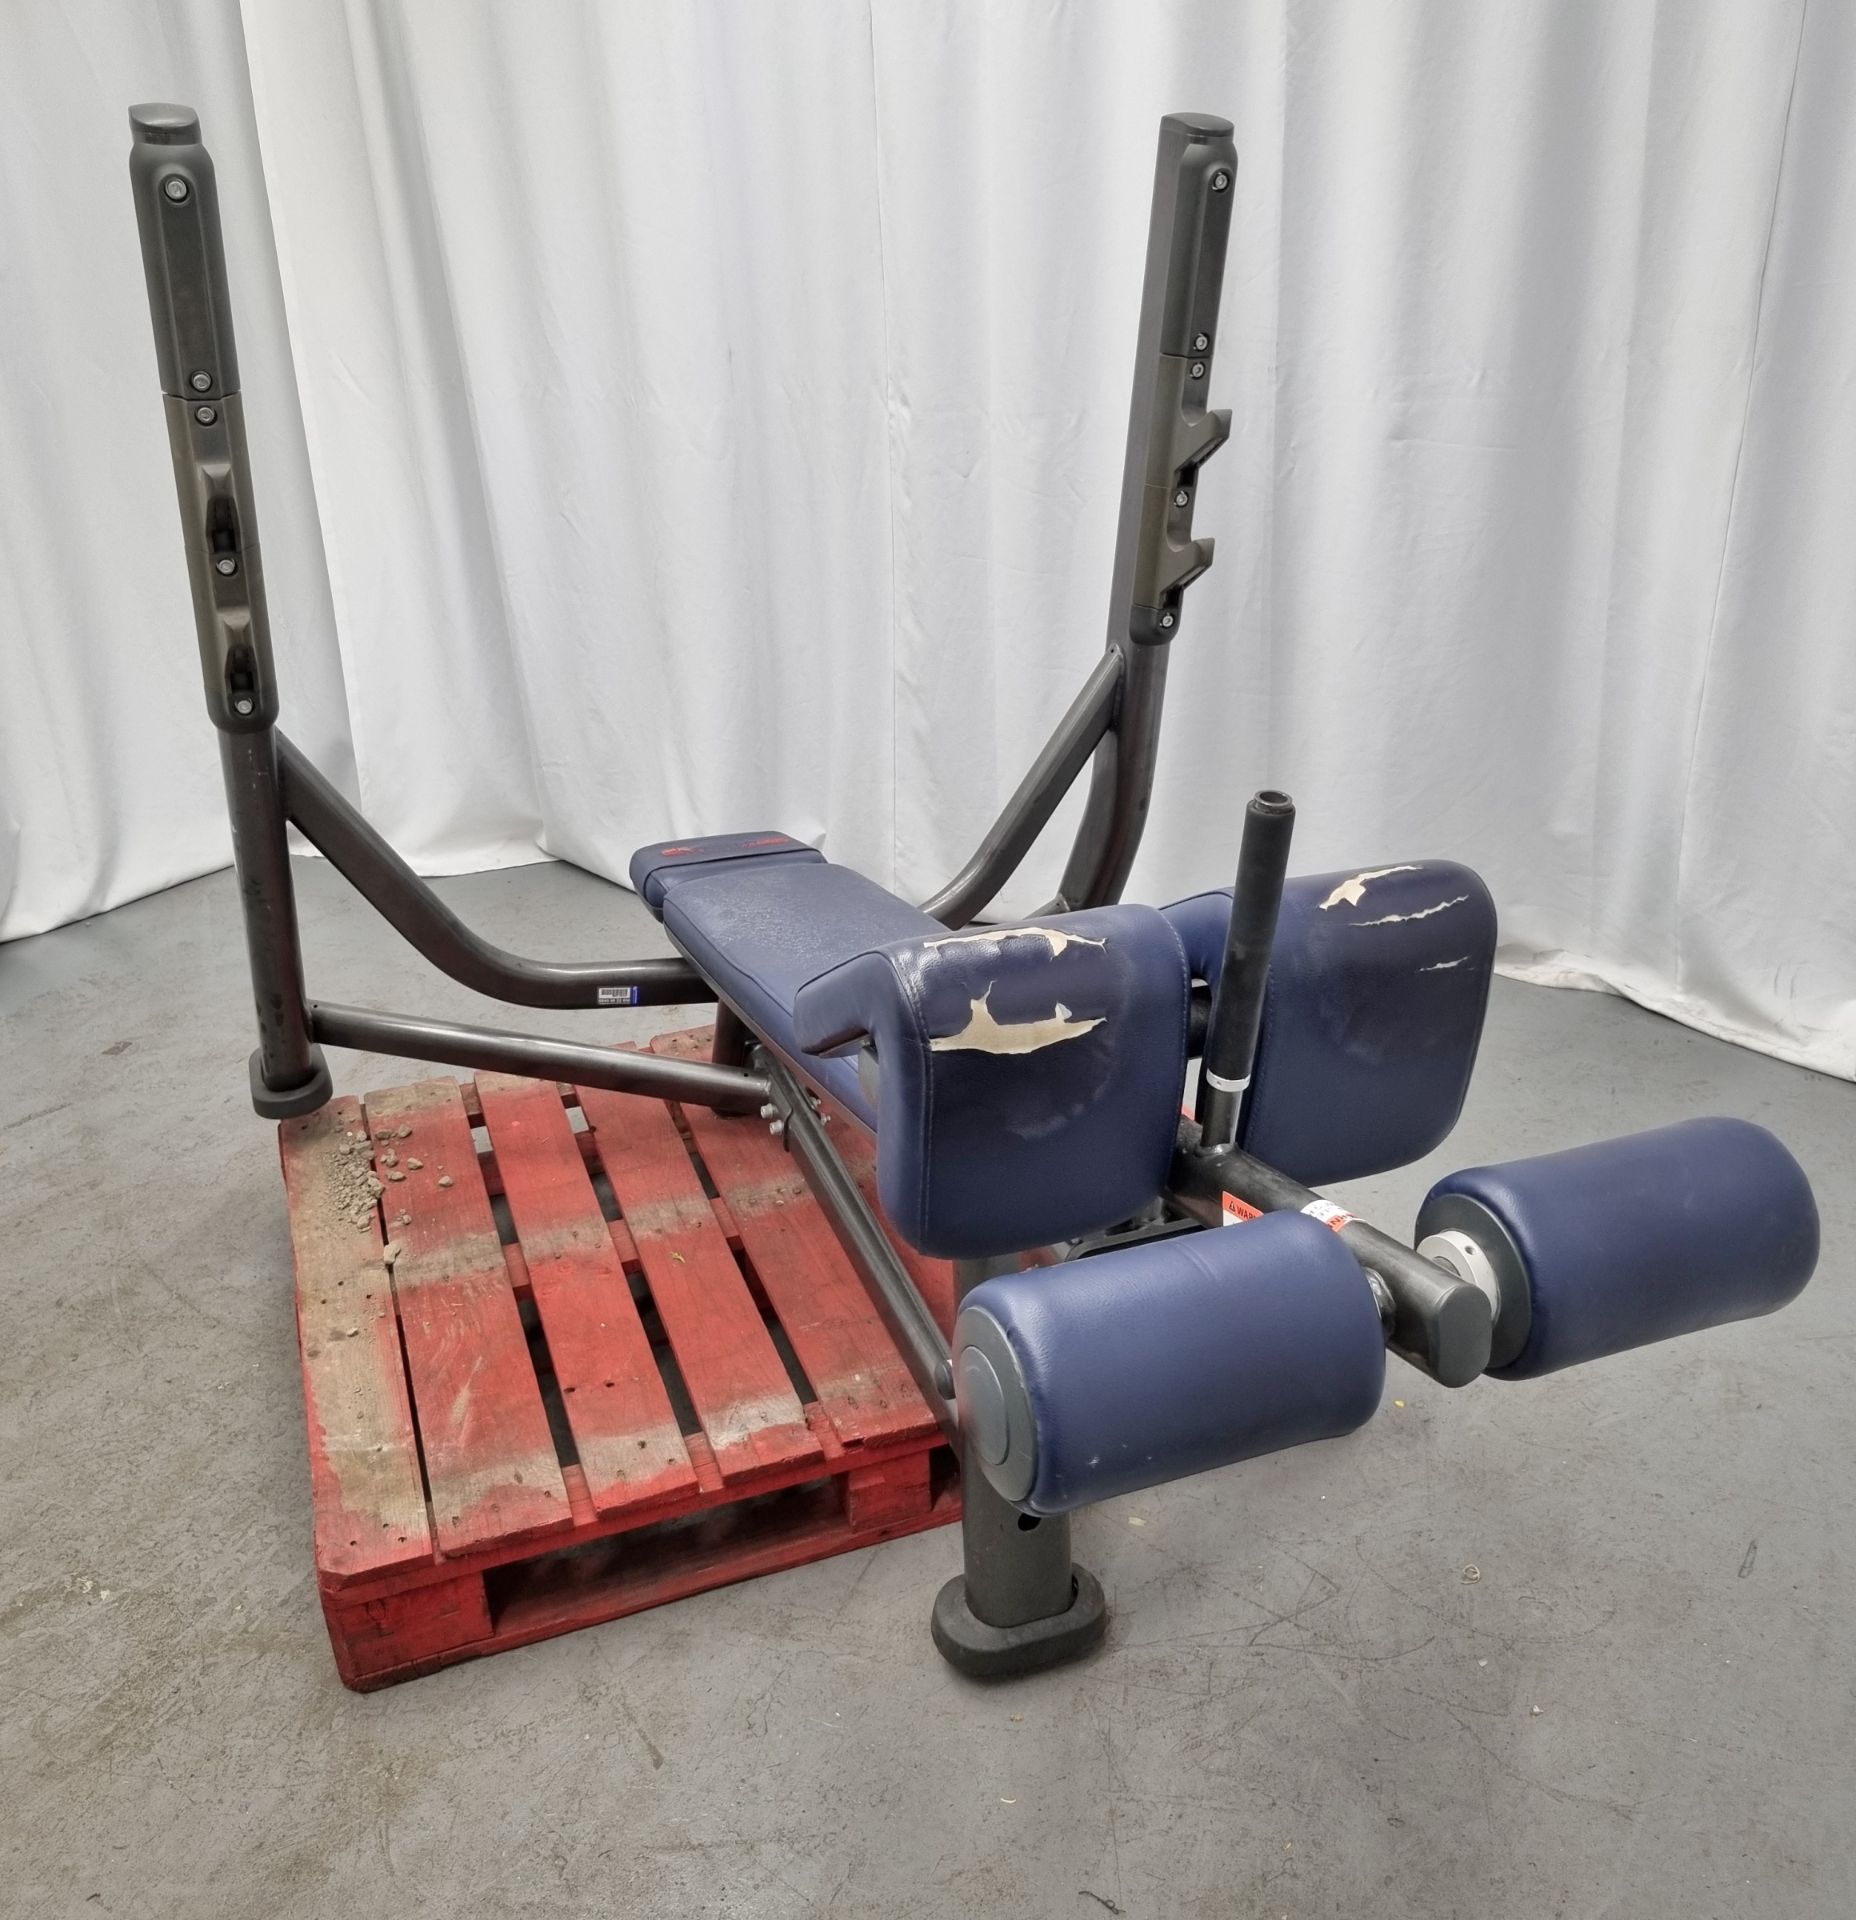 Incline weight bench - L 1750 x W 130 x H 1260mm - Image 2 of 5